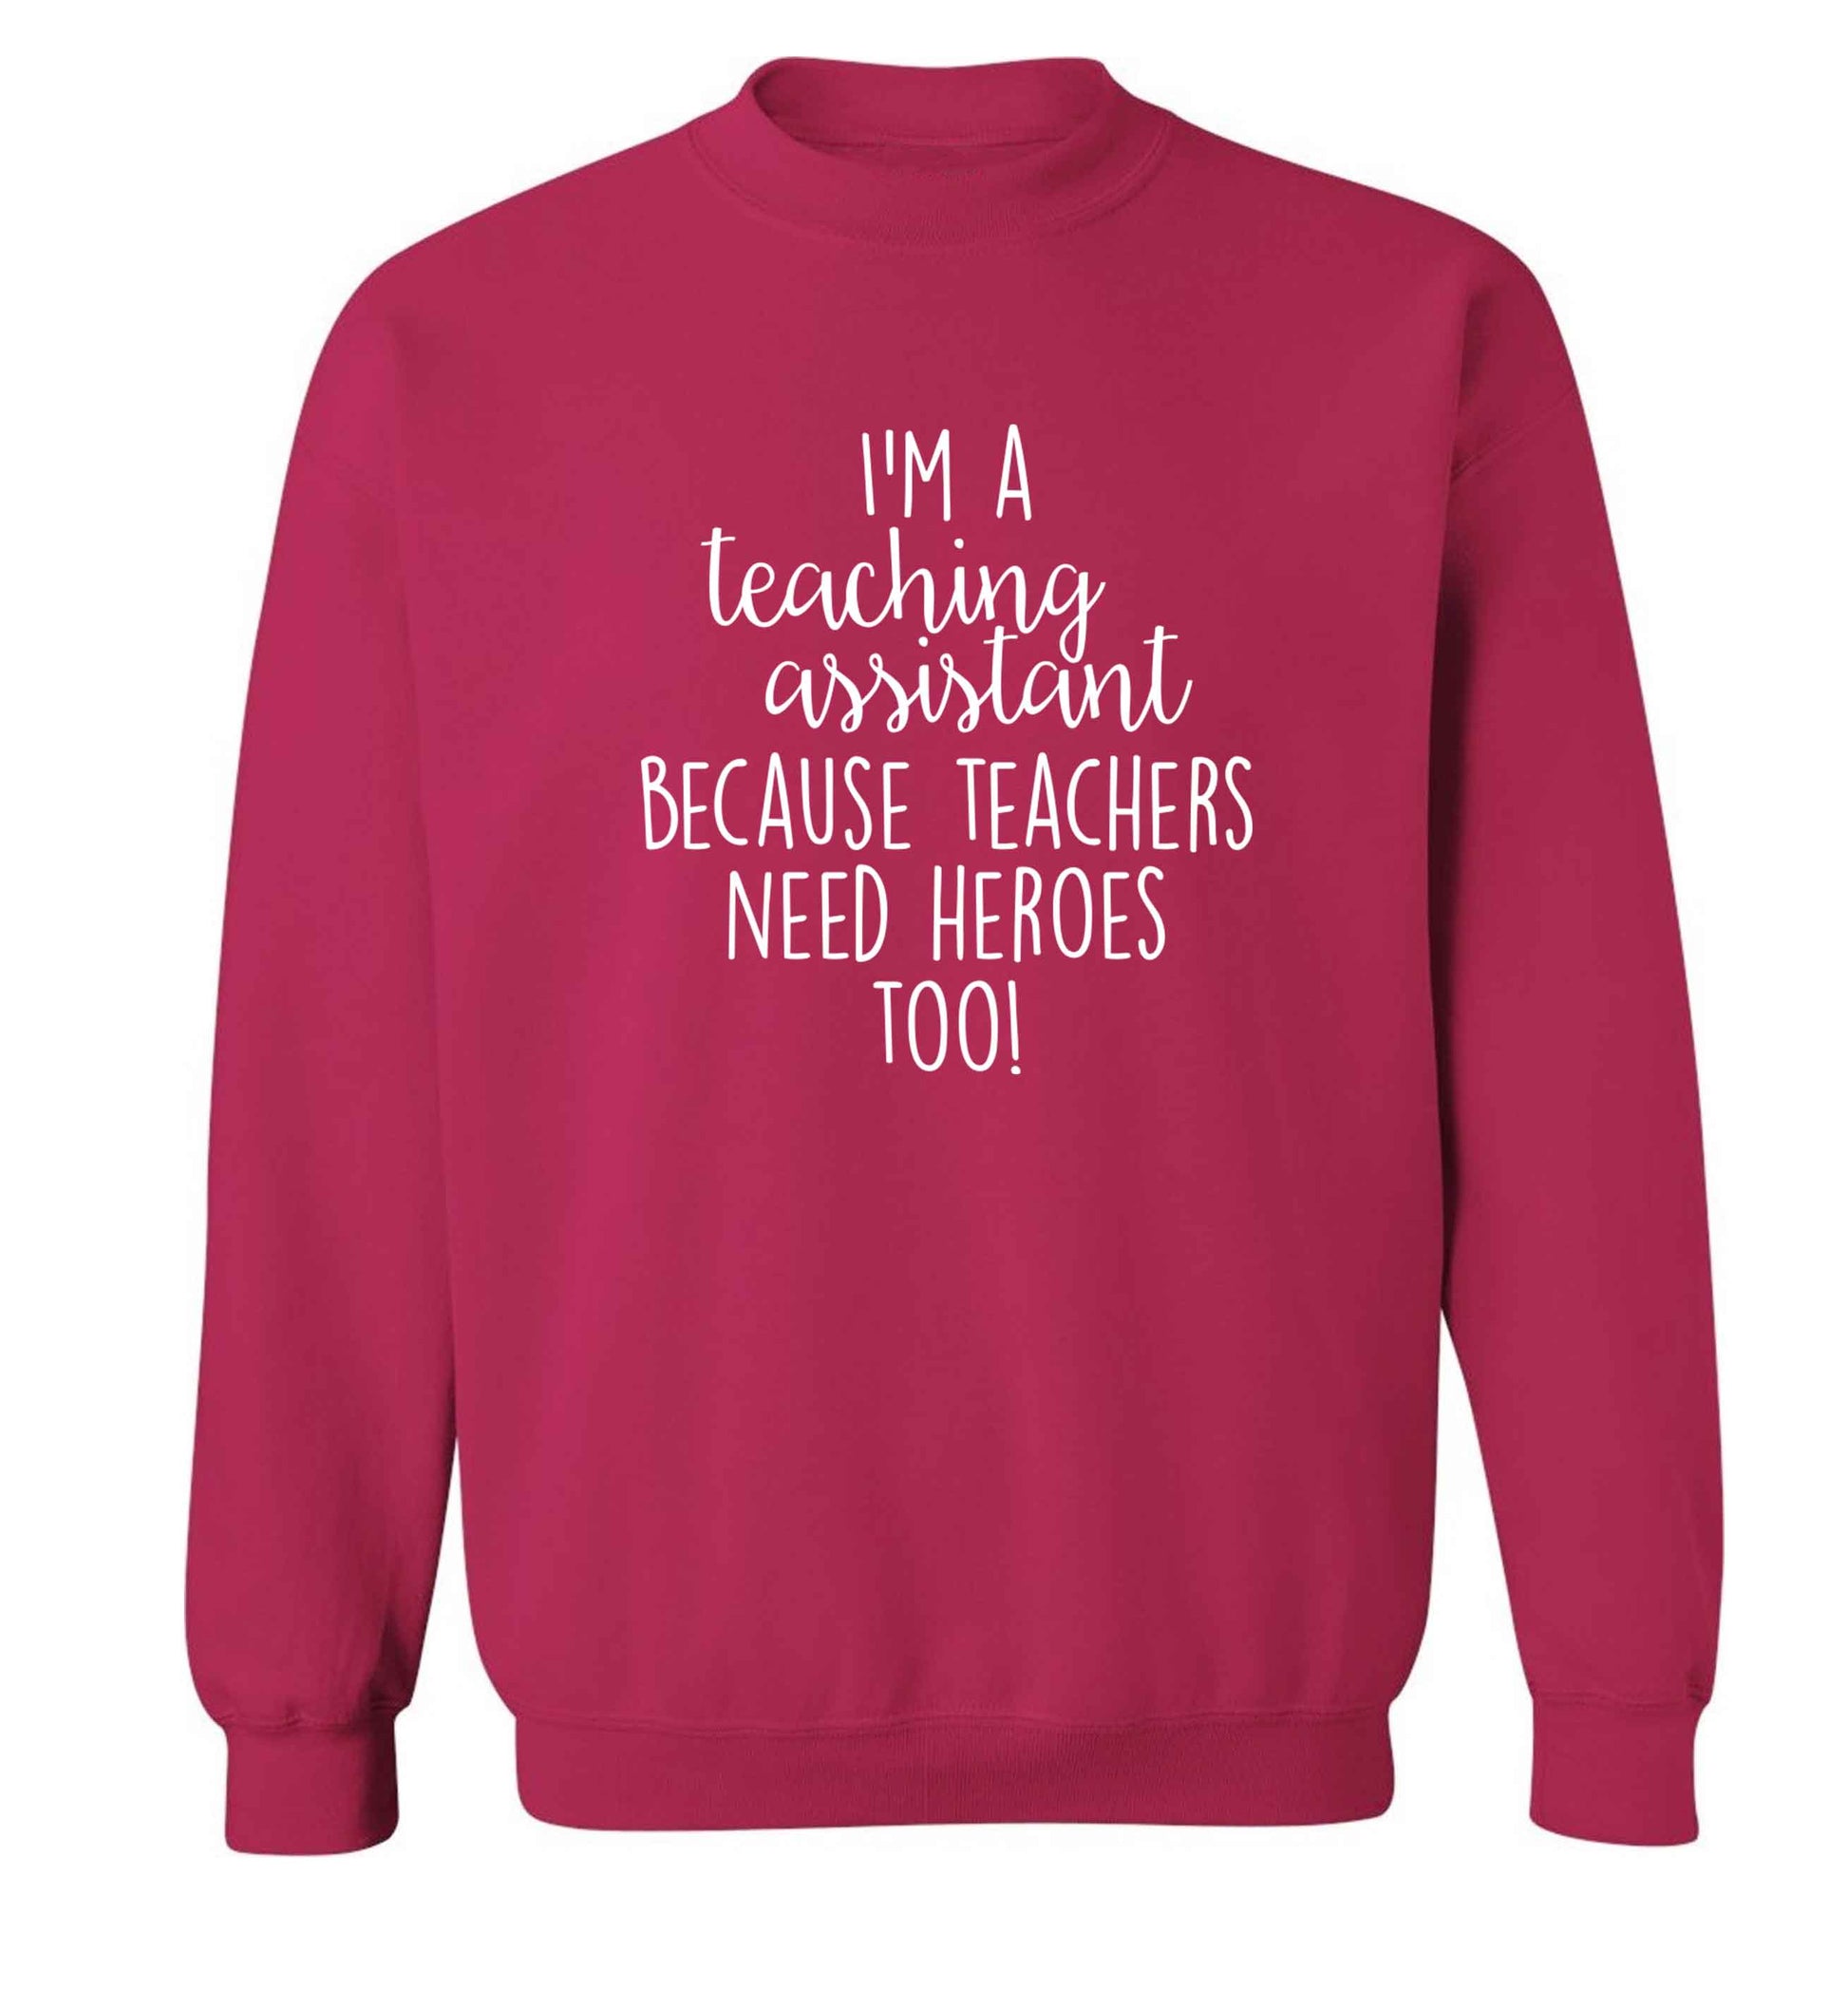 I'm a teaching assistant because teachers need heroes too! adult's unisex pink sweater 2XL